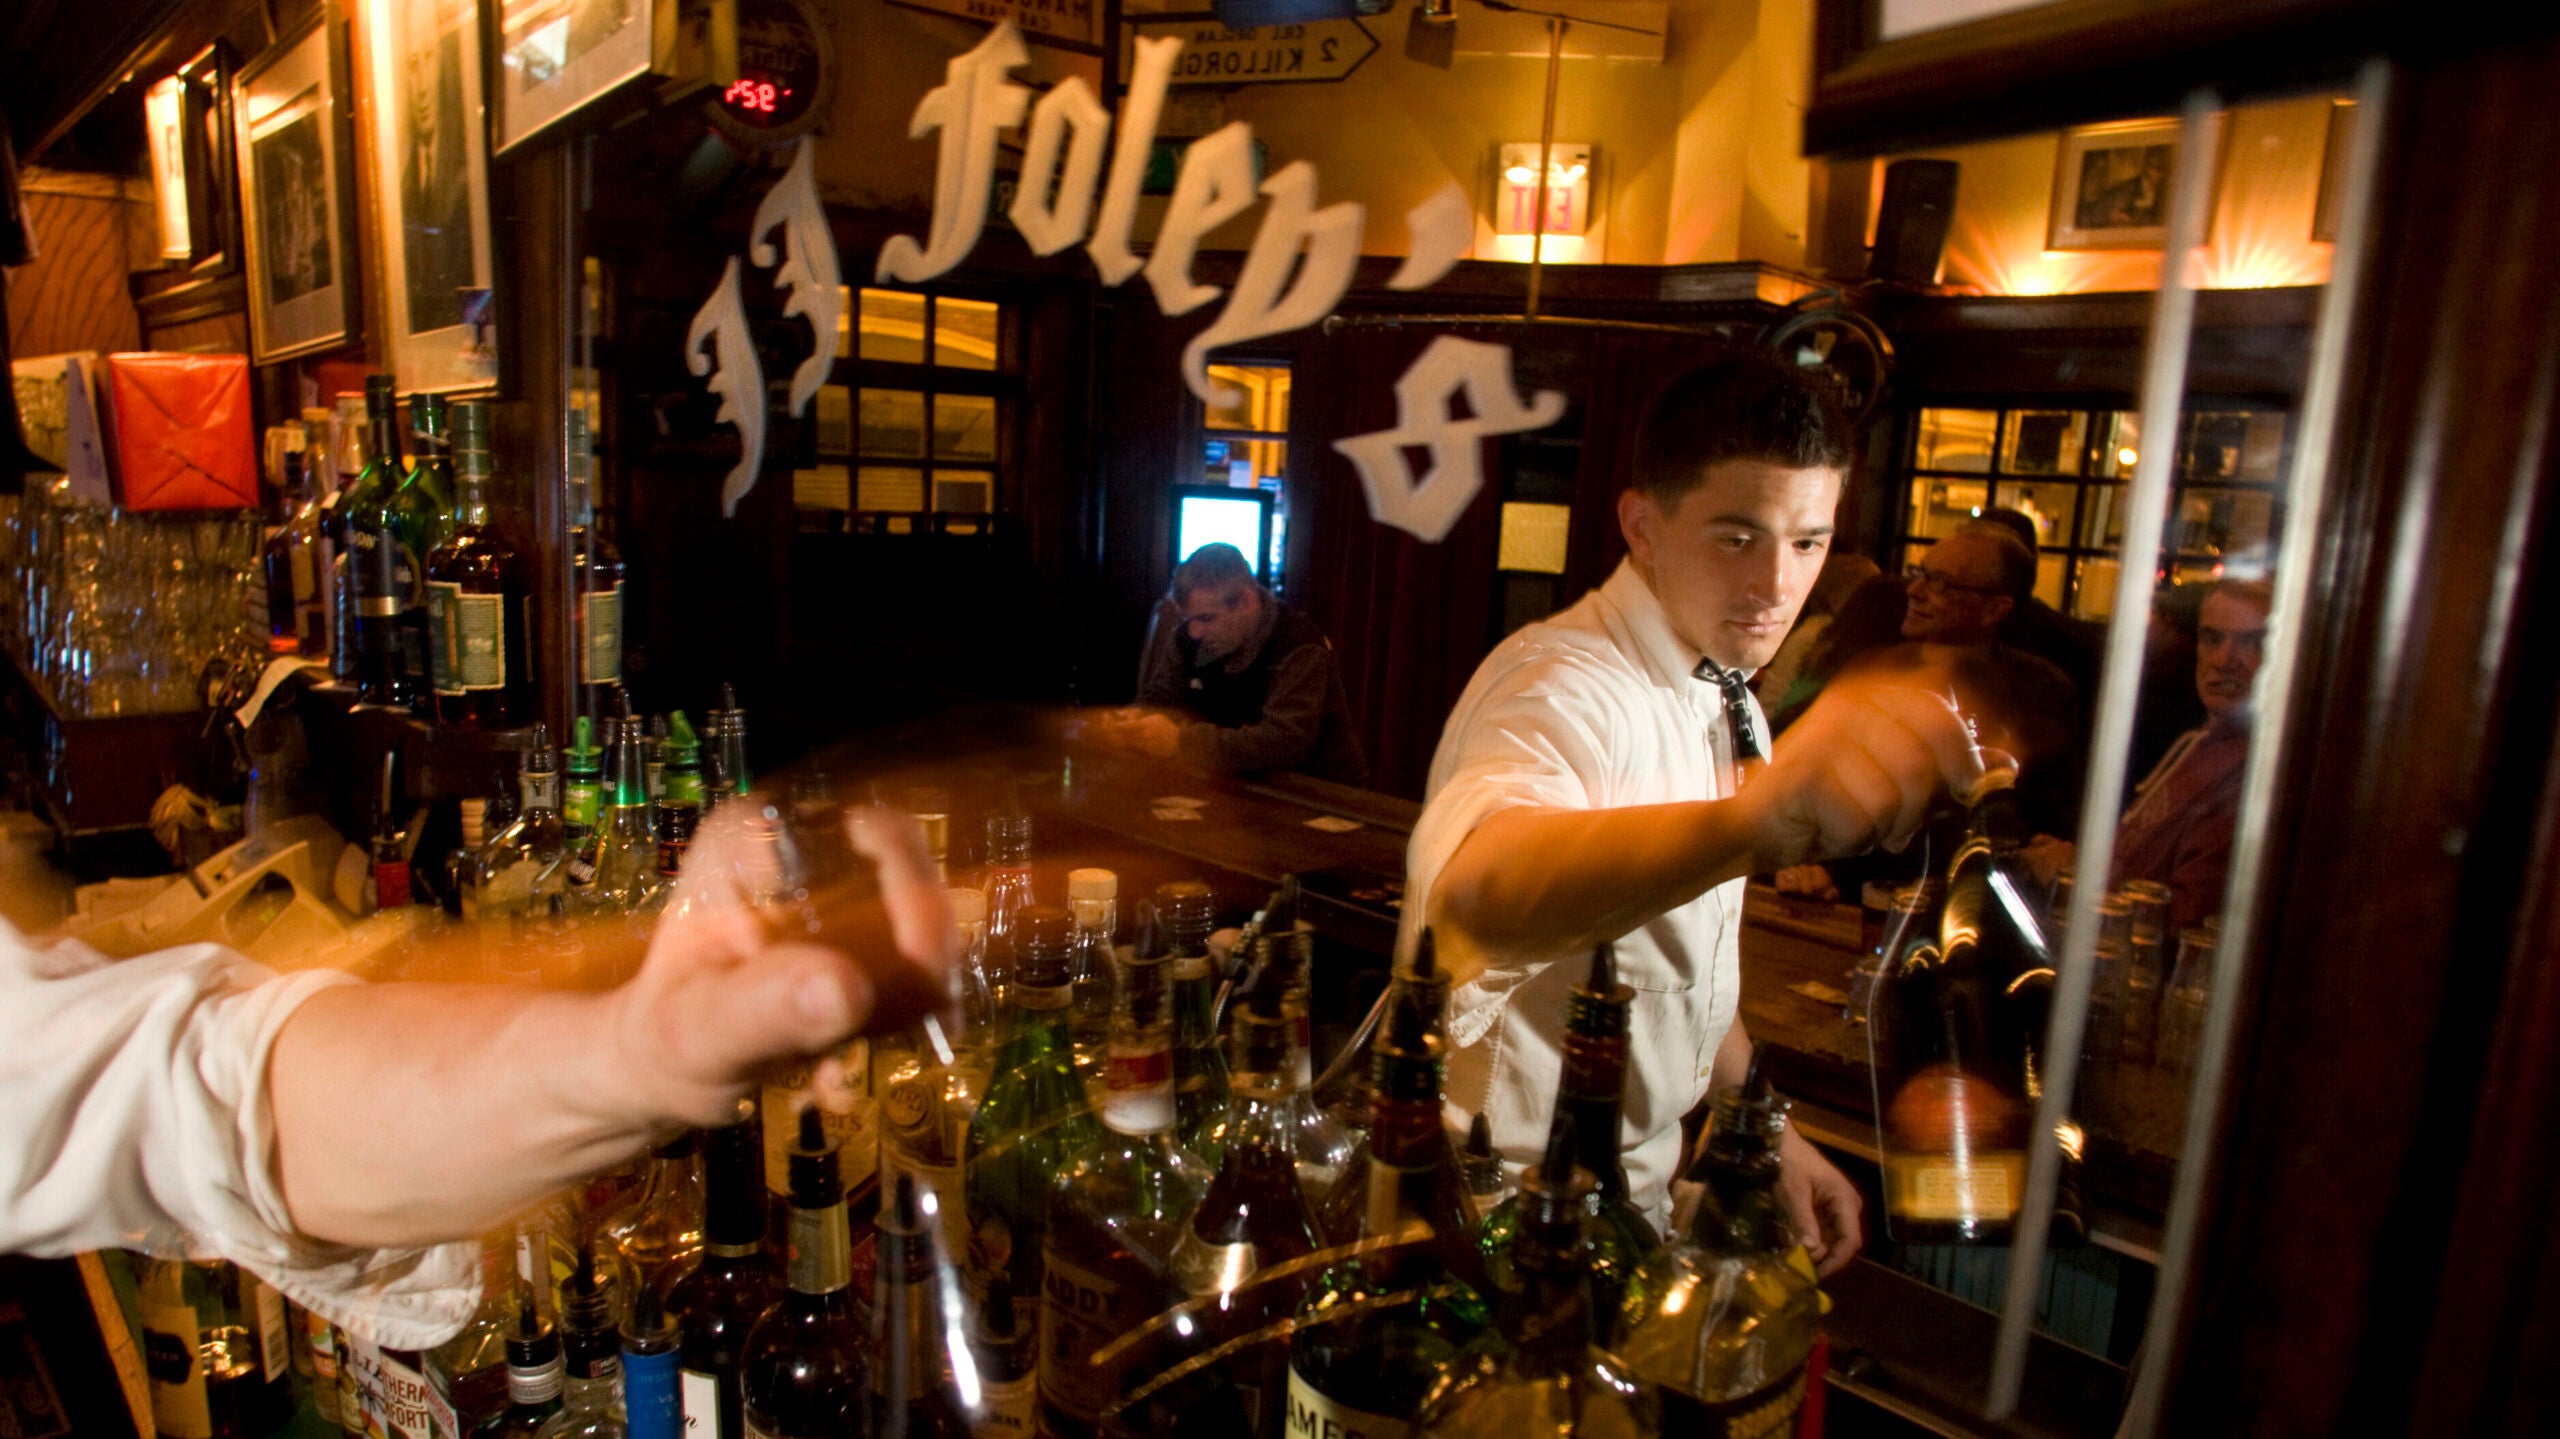 J.J. Foley's in Boston was founded in 1909.